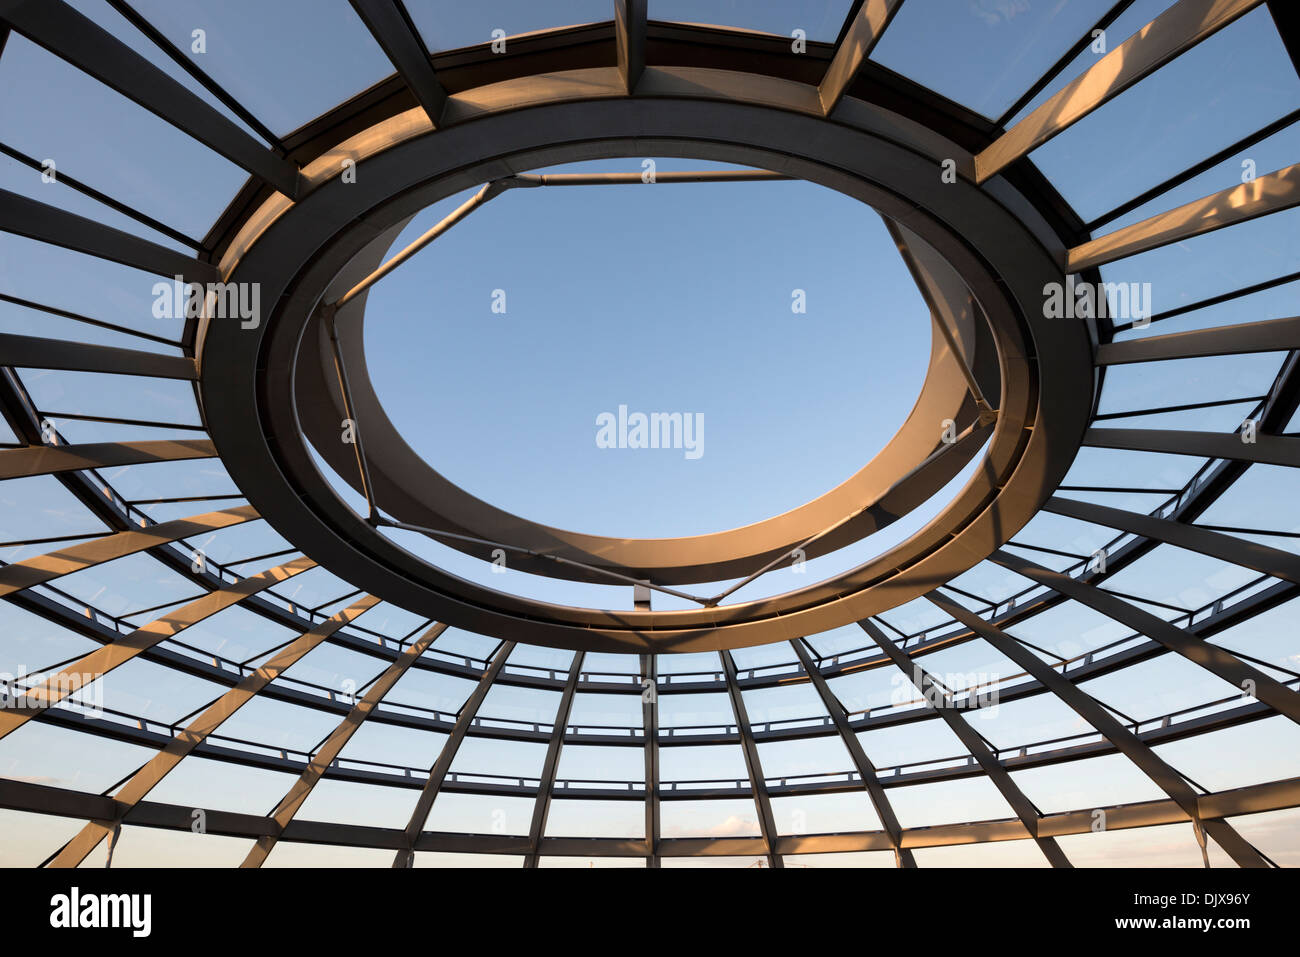 A skylight in the glass dome of the Reichstag building in Berlin, Germany. Stock Photo